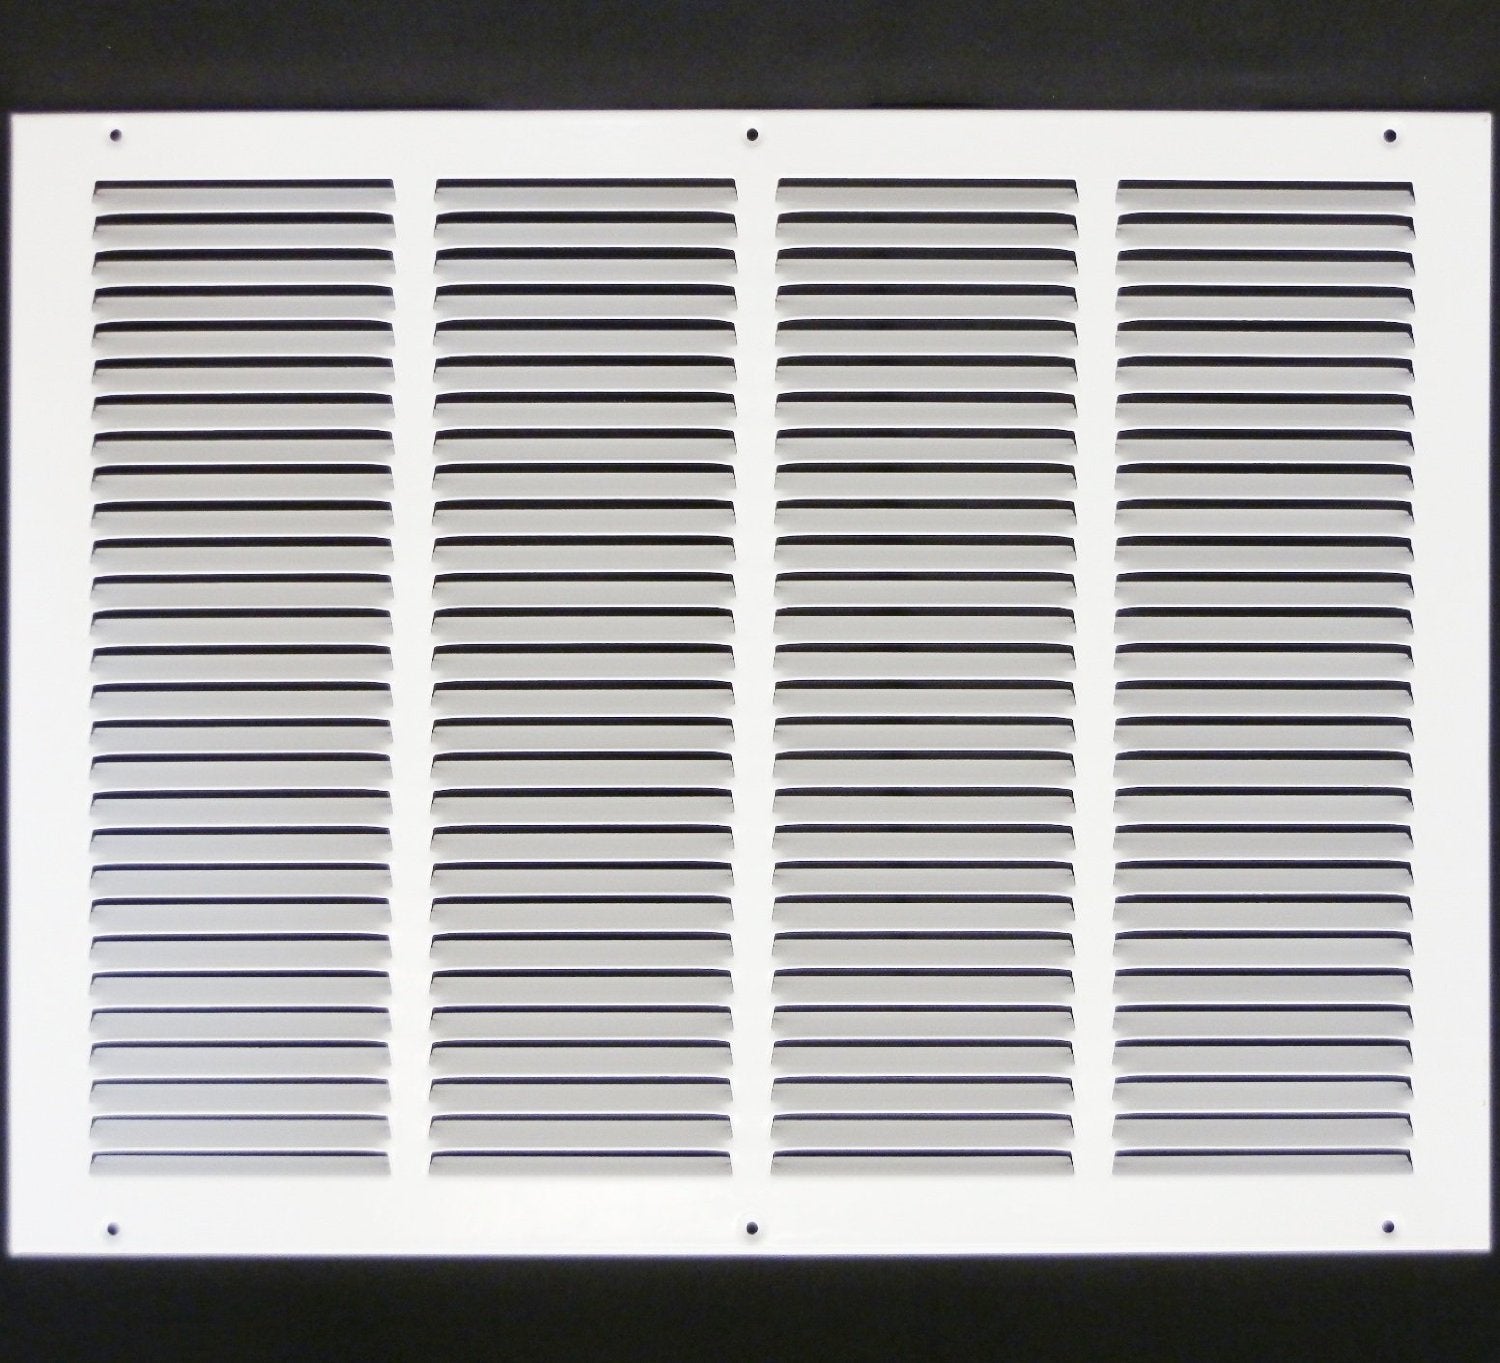 20" X 16" Air Vent Return Grilles - Sidewall and Ceiling - Steel